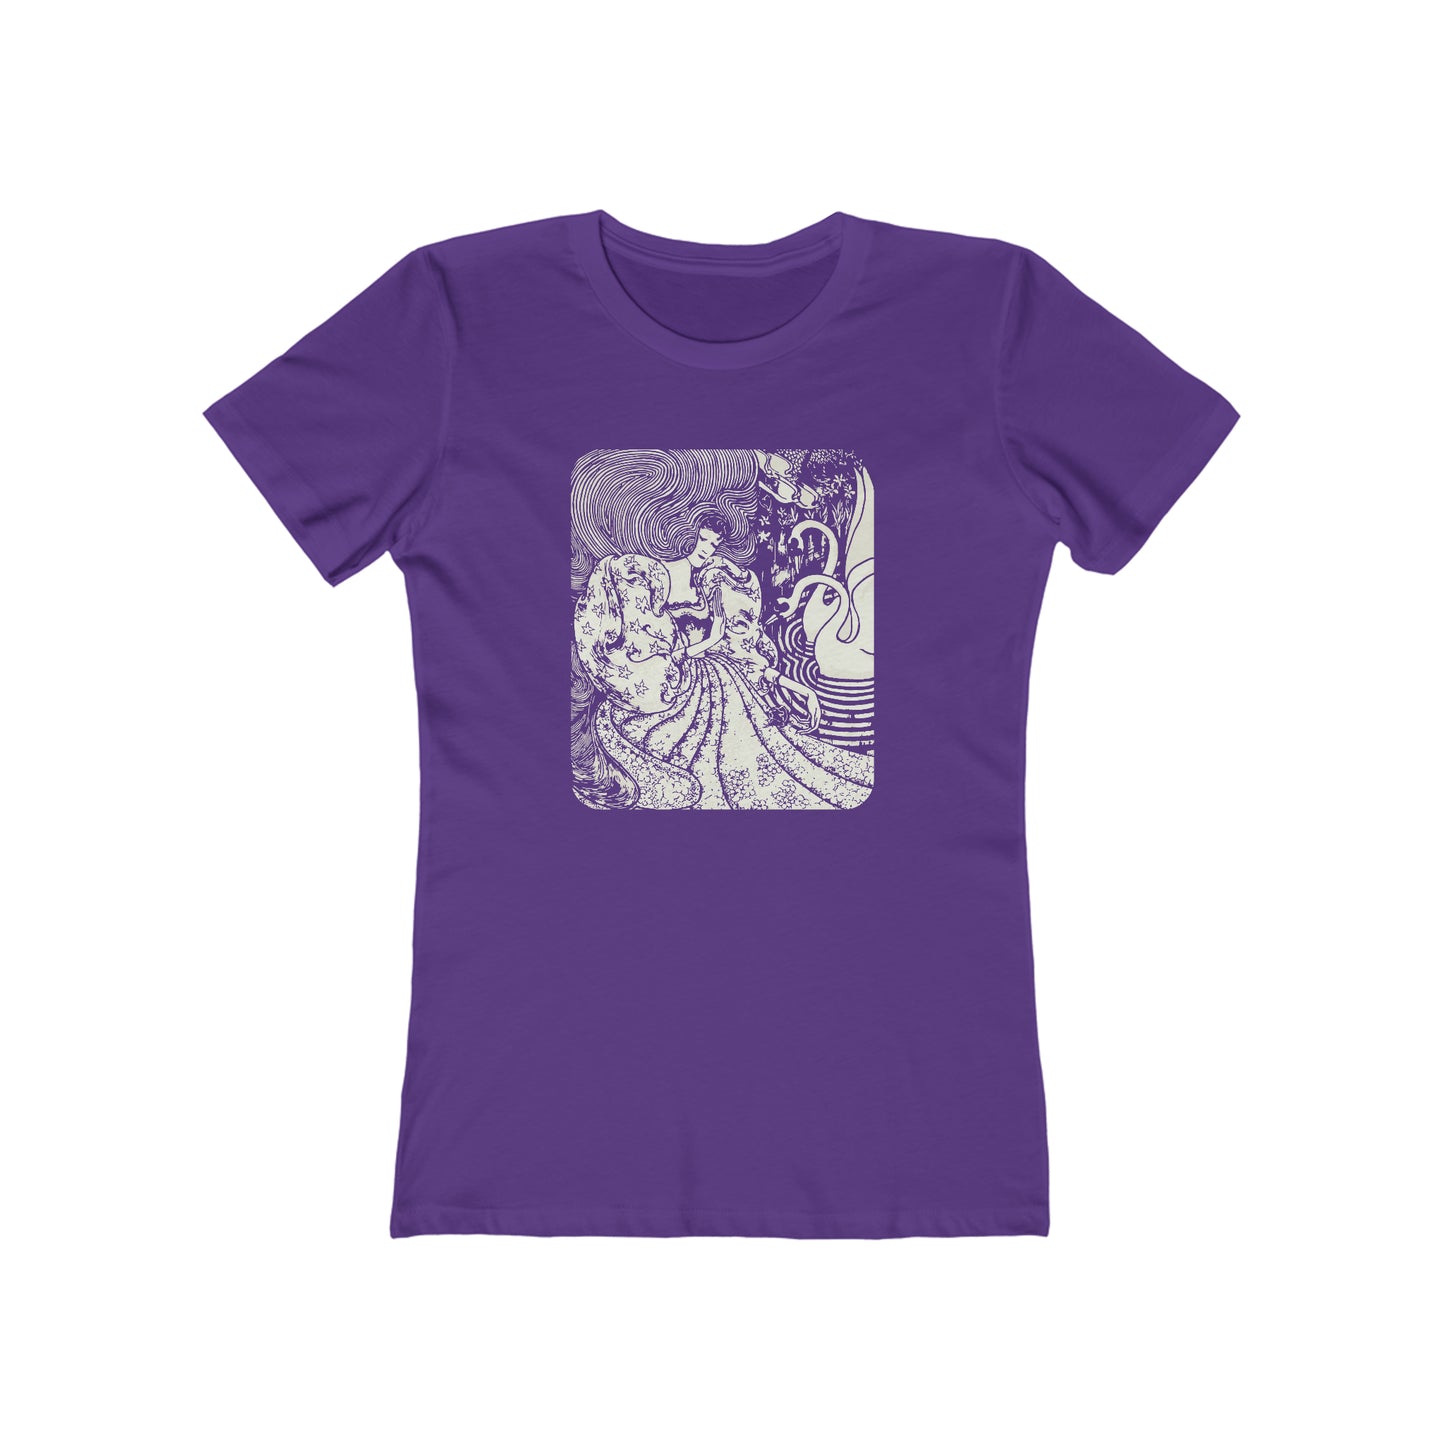 Woman and Swans - Women's T-Shirt